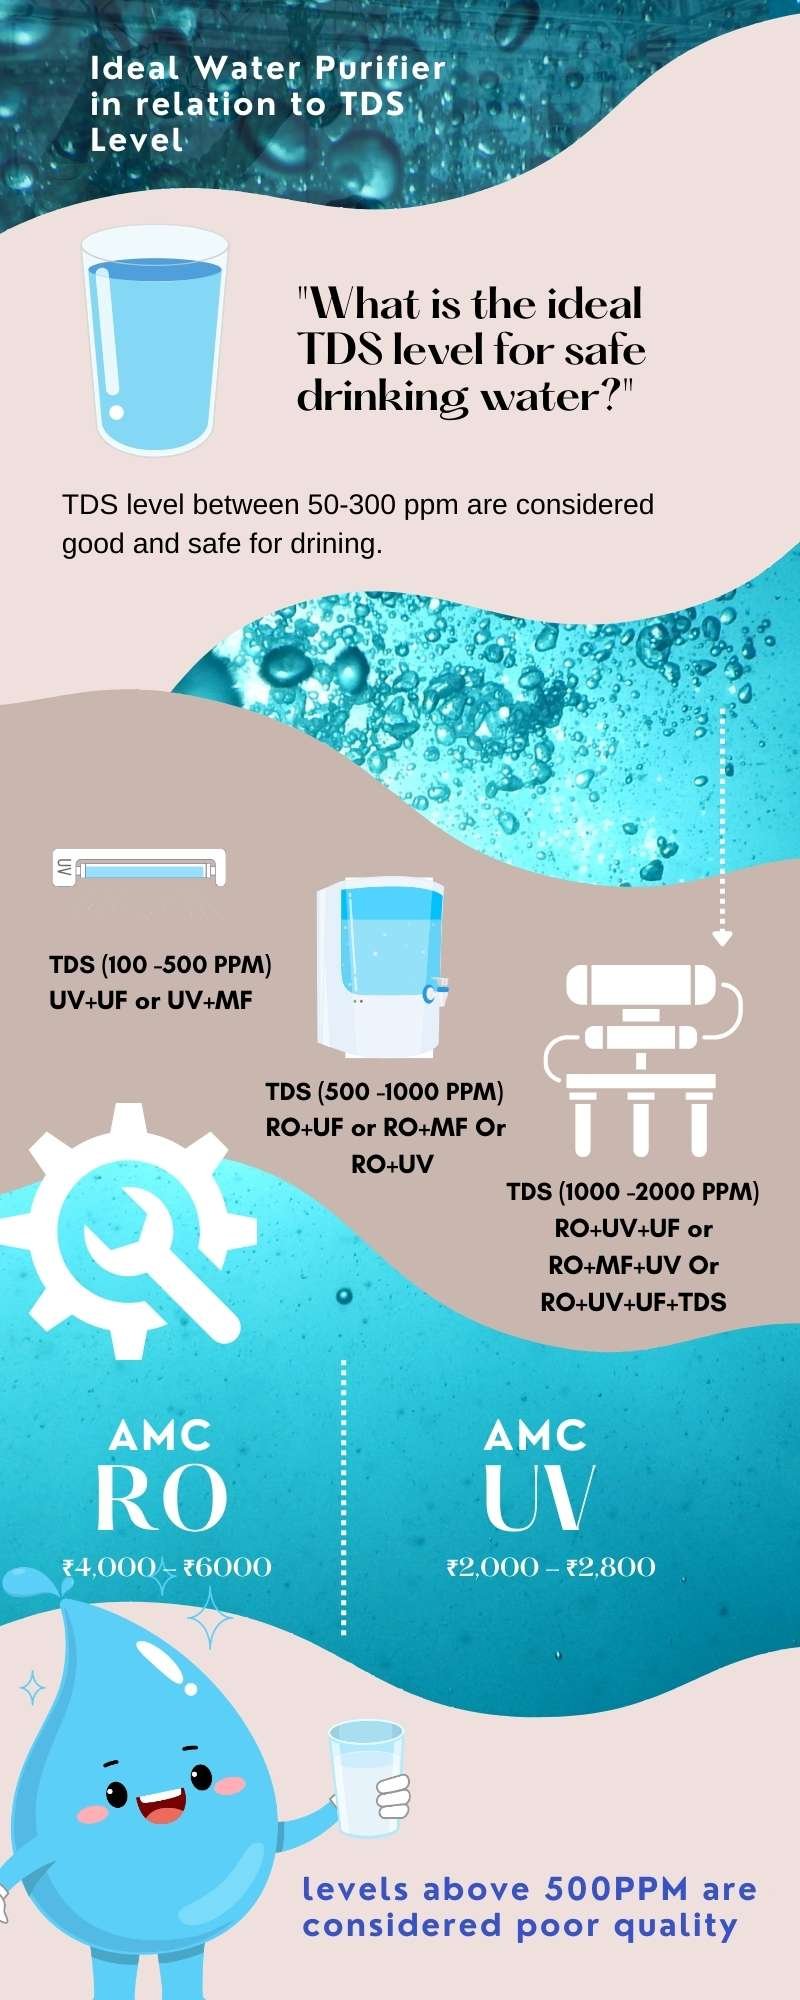 Ideal Water Purifier in relation to TDS Level infographic